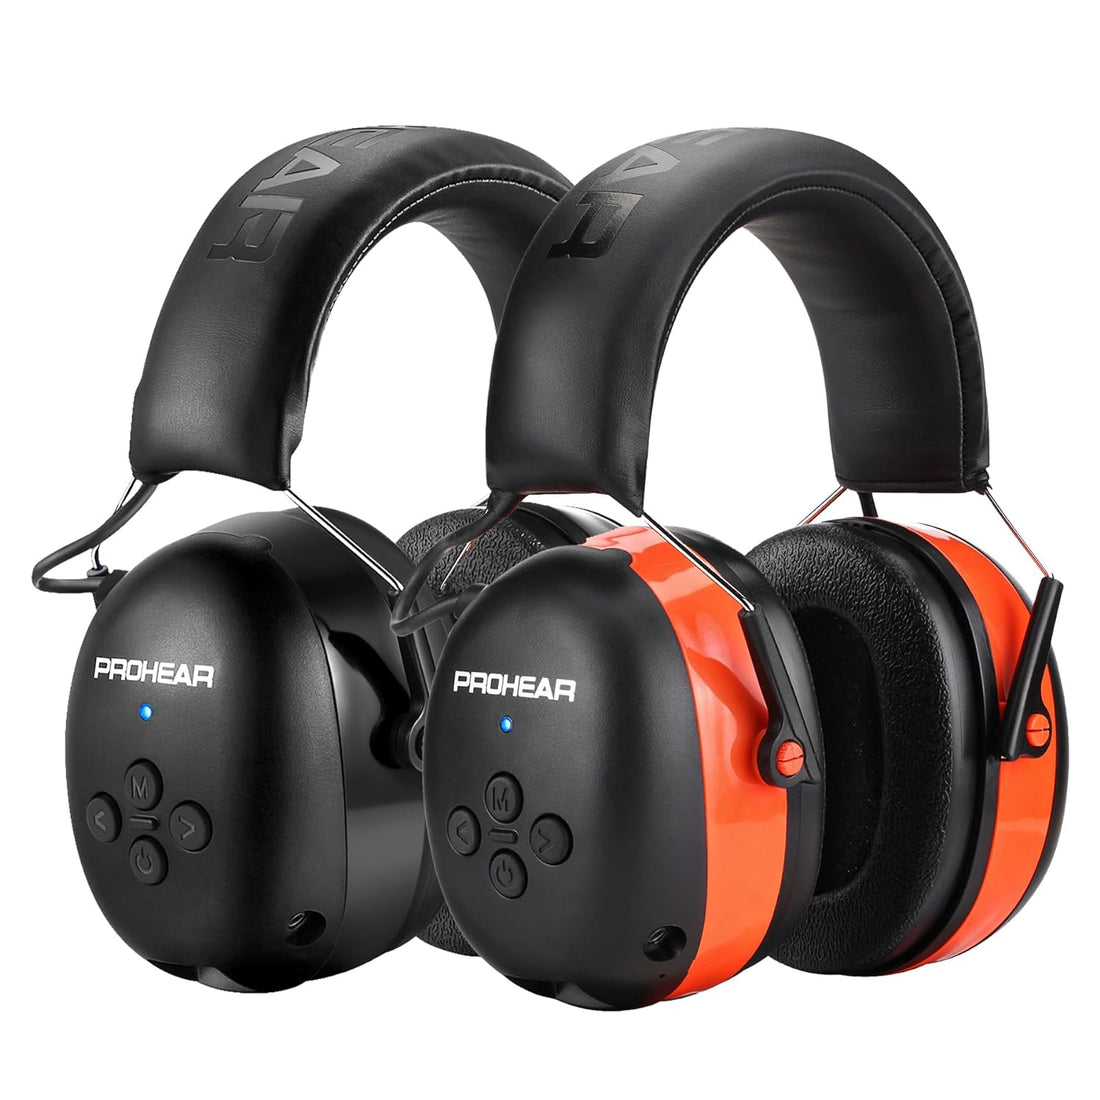 PROHEAR 037 2 Pack Bluetooth 5.0 Hearing Protection Headphones with Rechargeable, 25dB NRR Safety Noise Reduction Ear Muffs for Mowing Workshops Snowblowing, Black and Orange